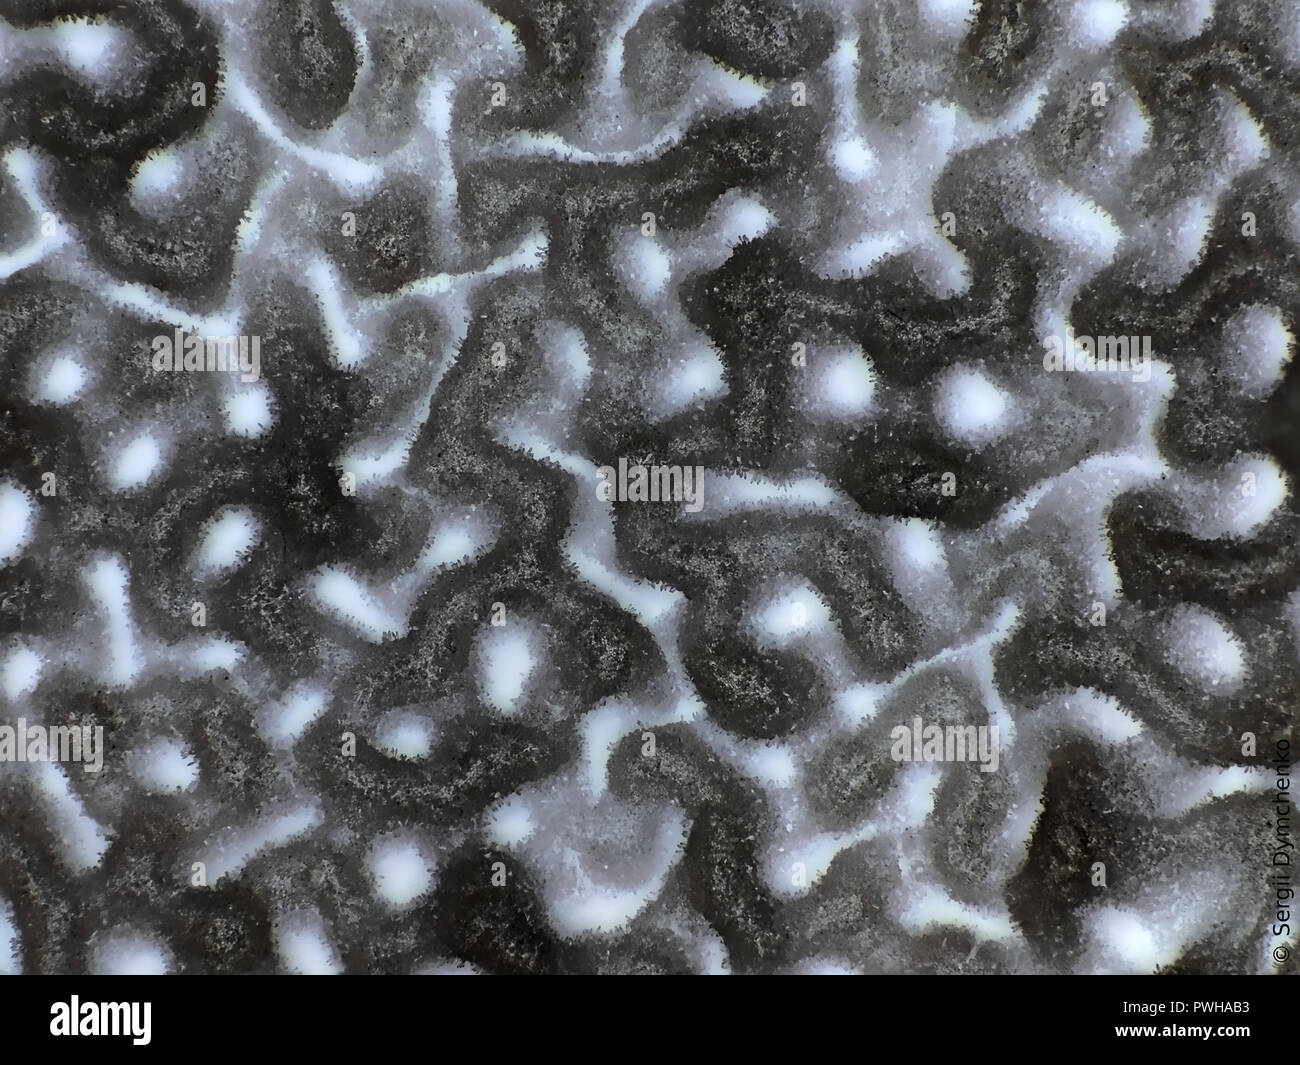 Inverted light micrograph of bolete mushroom pores, field of view is about 3mm wide Stock Photo